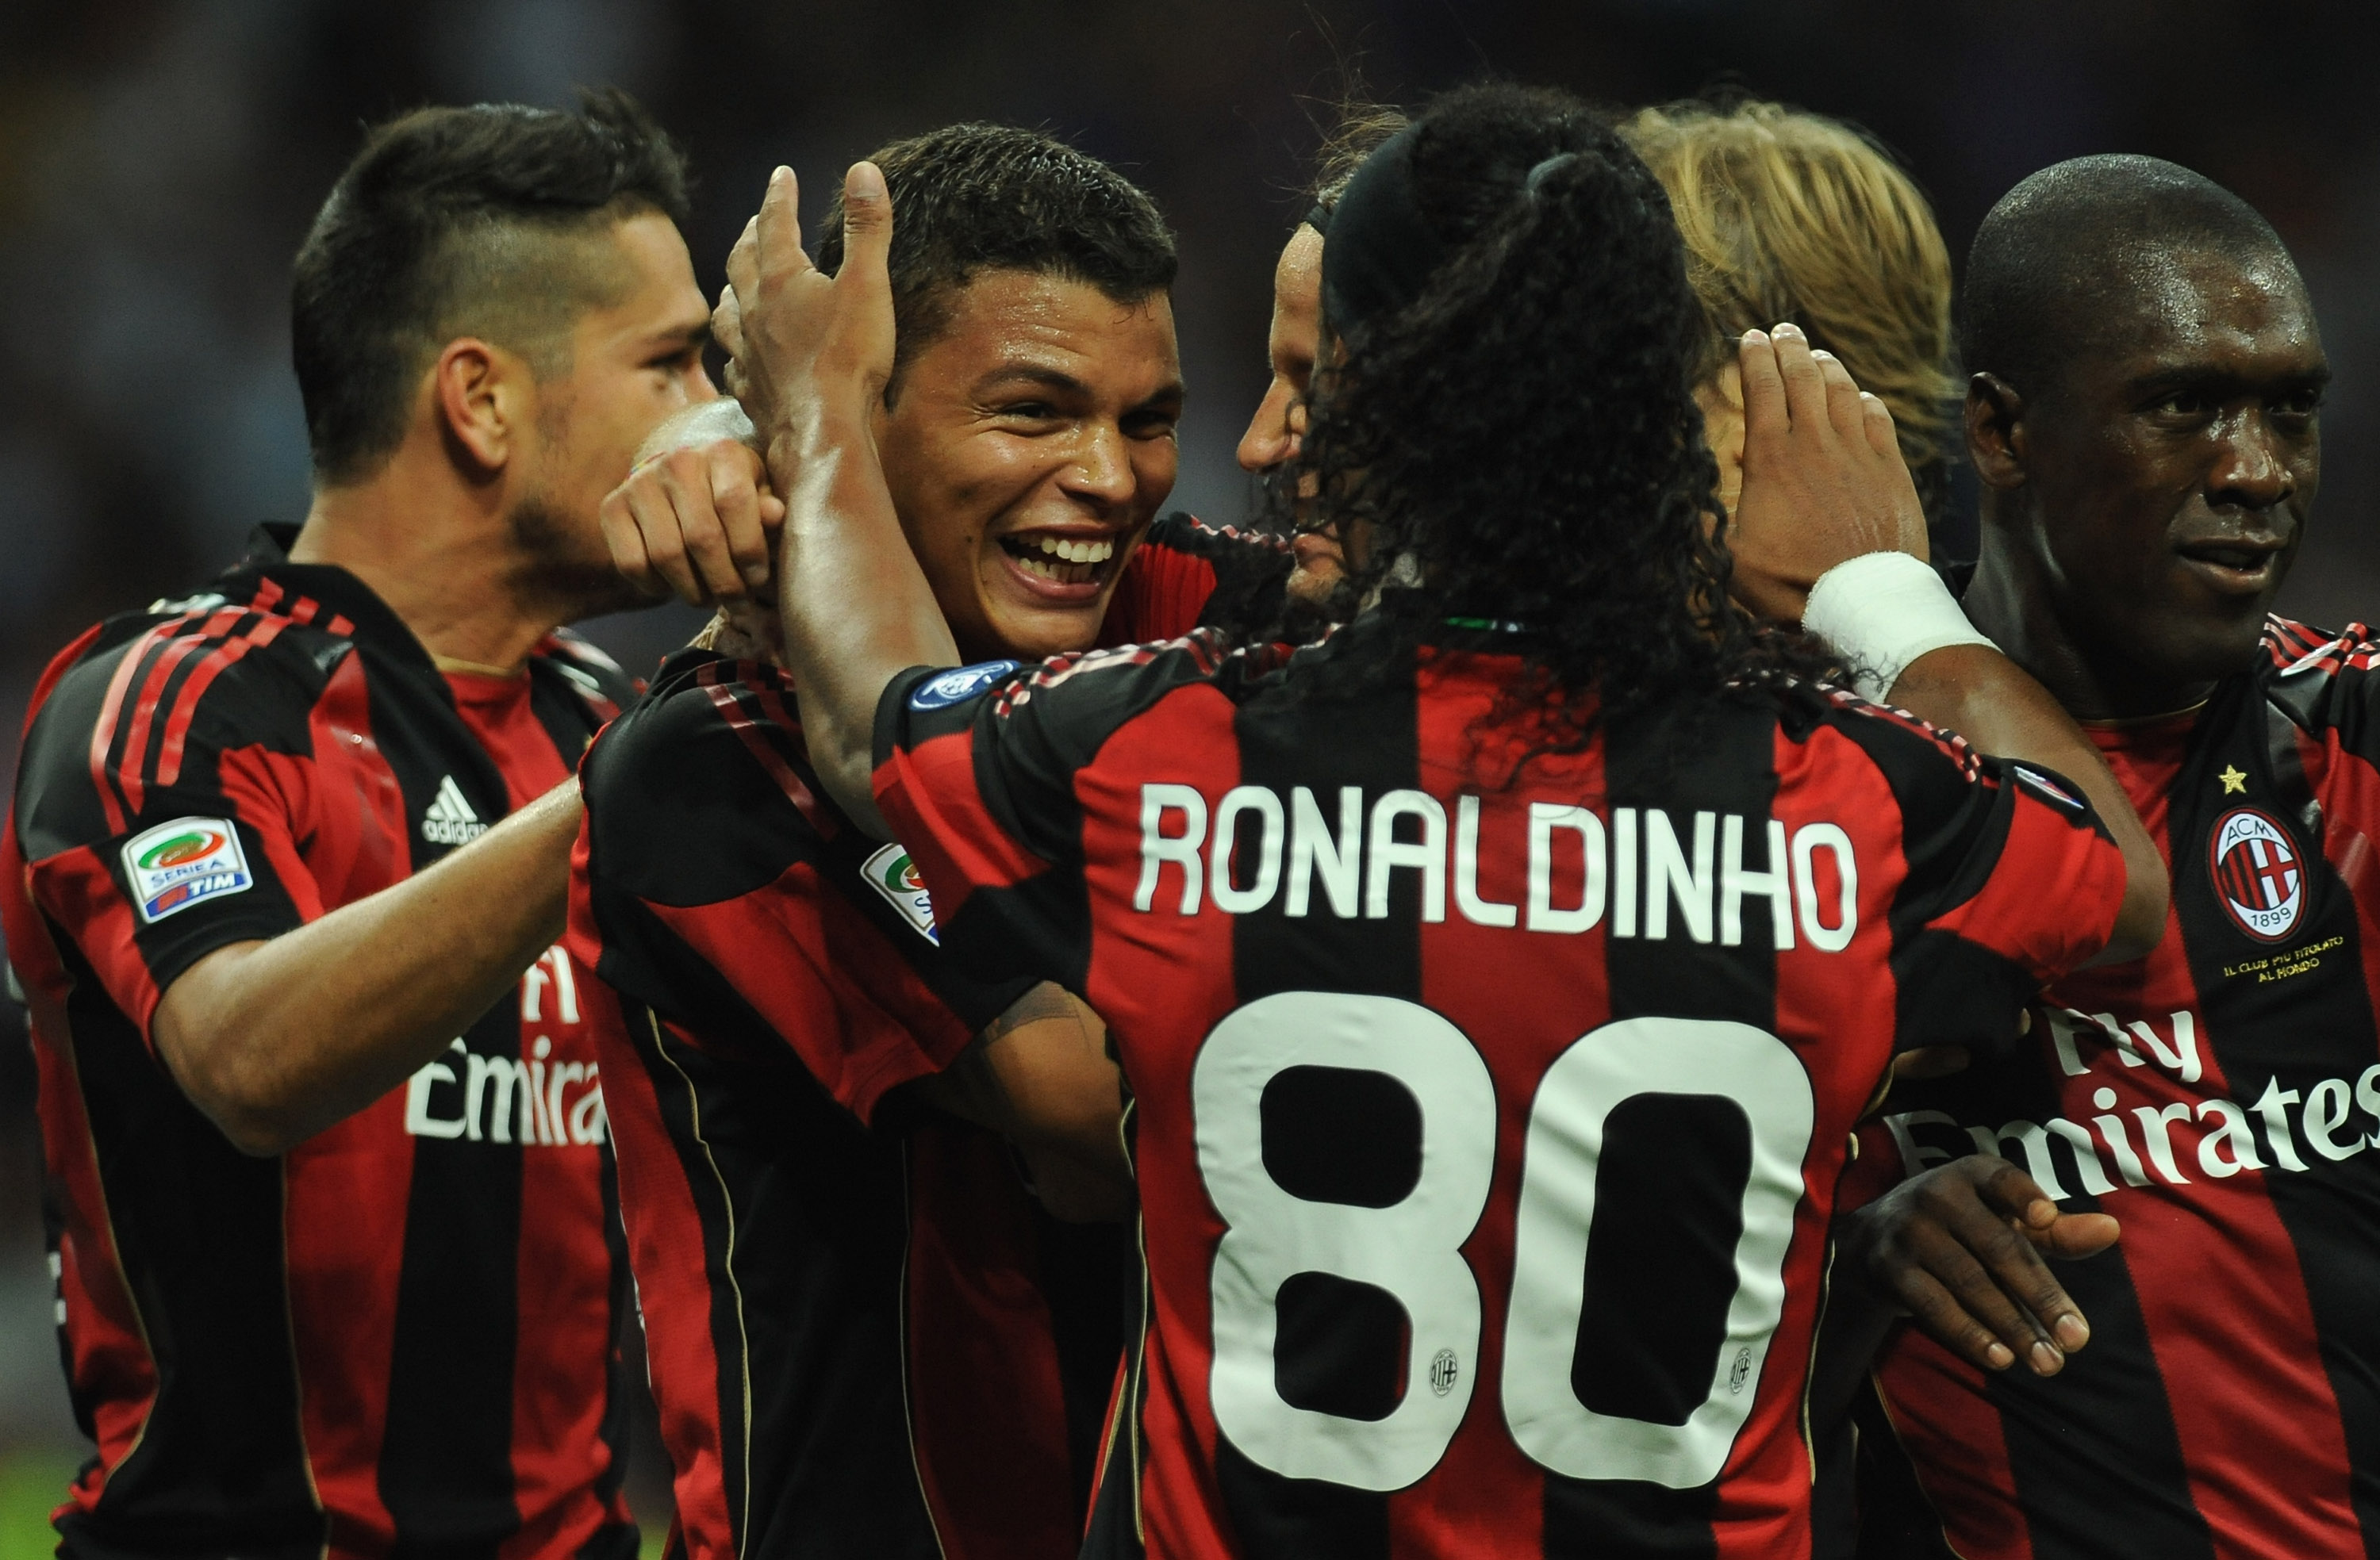 MILAN, ITALY - AUGUST 29:  Thiago Silva (C) of AC Milan celebrates with his team mates after scoring during the Serie A match between AC Milan and US Lecce at Stadio Giuseppe Meazza on August 29, 2010 in Milan, Italy.  (Photo by Valerio Pennicino/Getty Im